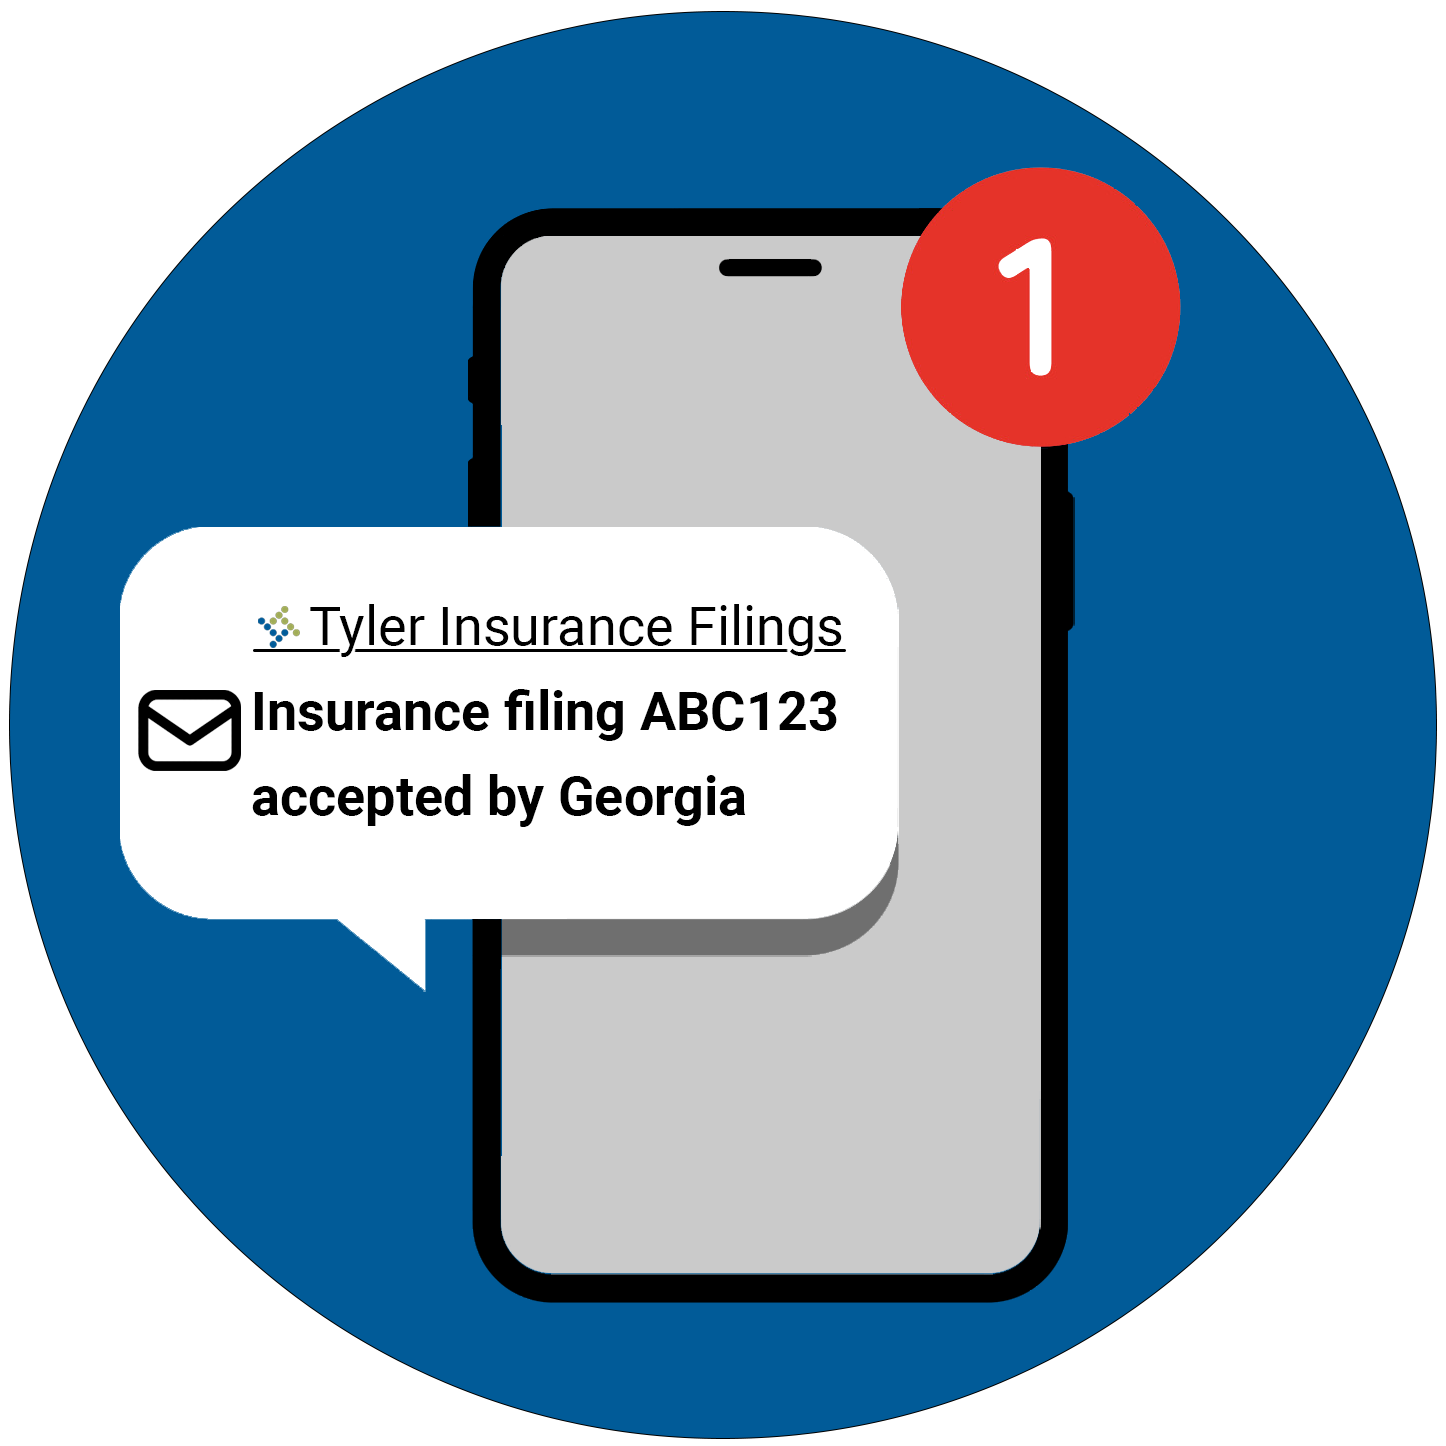 A cell phone receives instant filing status updates with Tyler Insurance Filings.